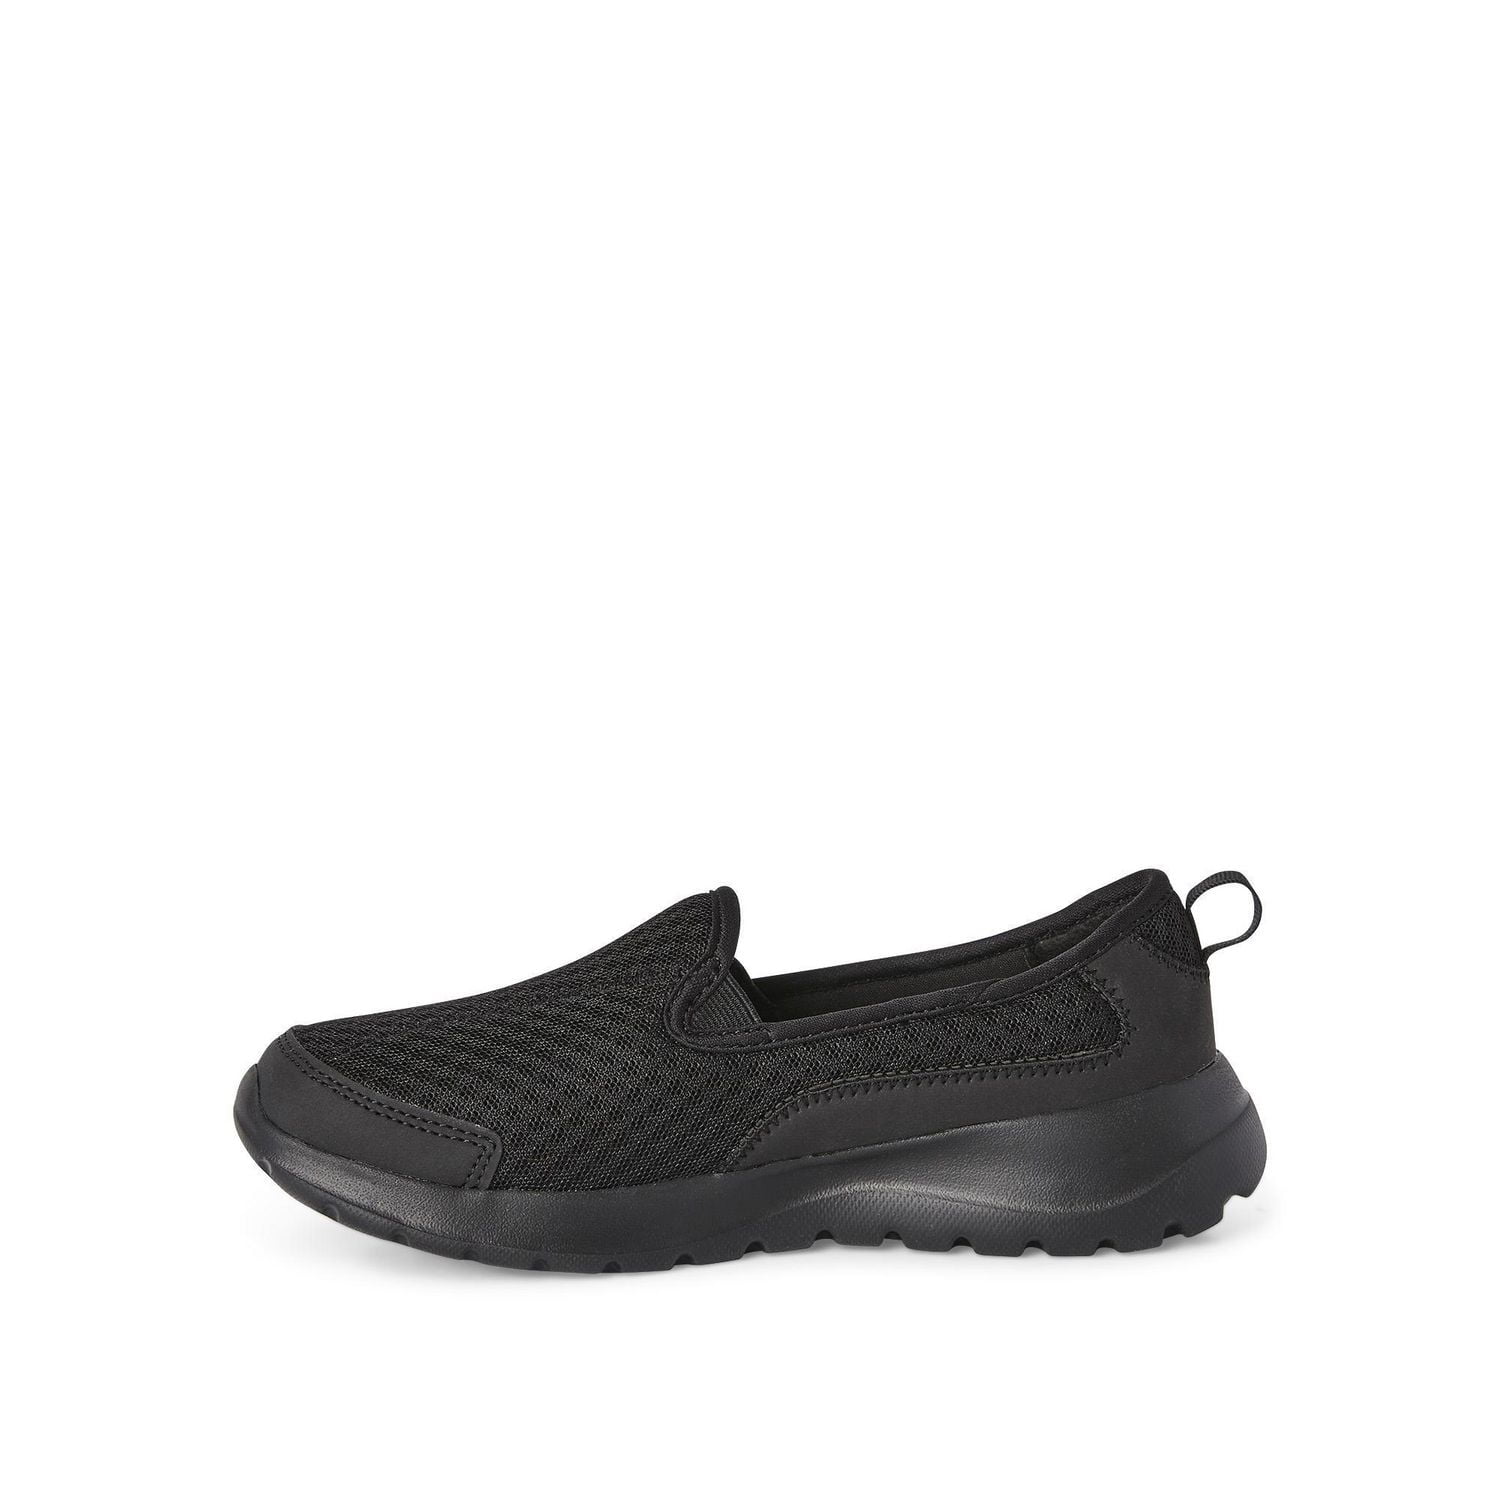 Women's Black Sneakers & Athletic Shoes